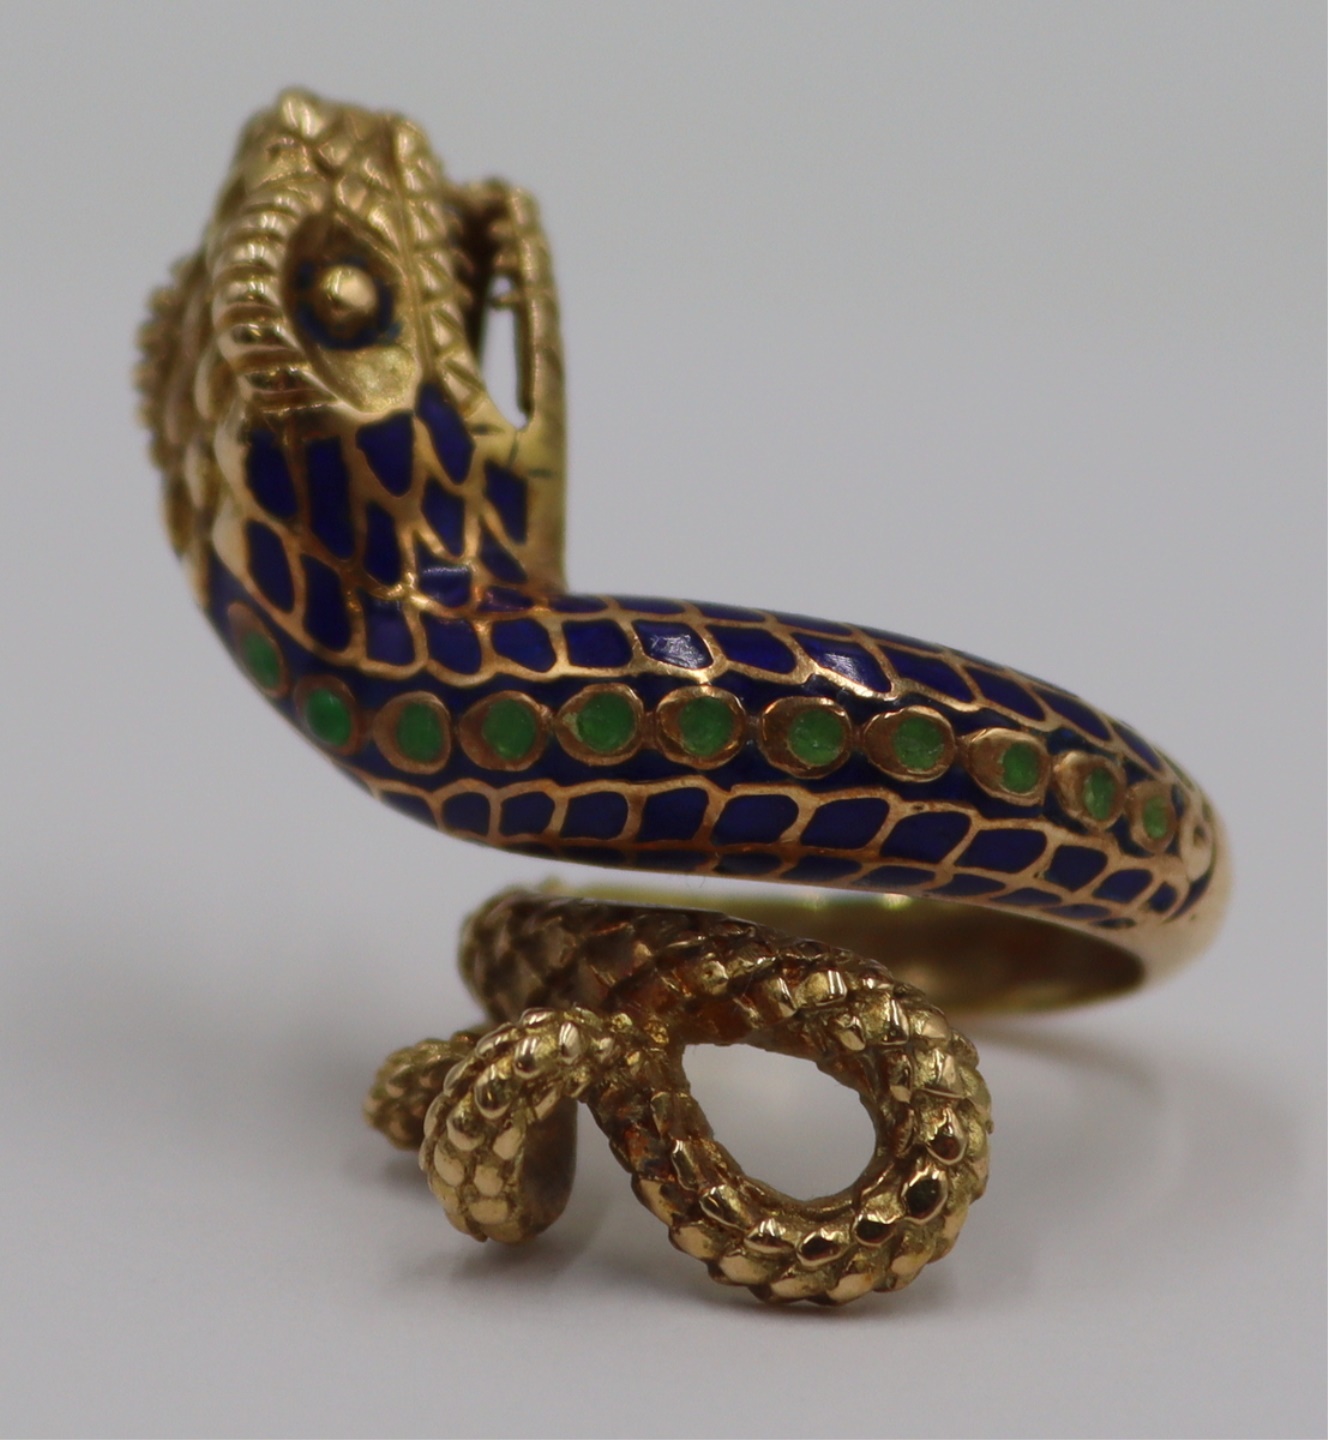 JEWELRY. 18KT GOLD AND ENAMEL SNAKE